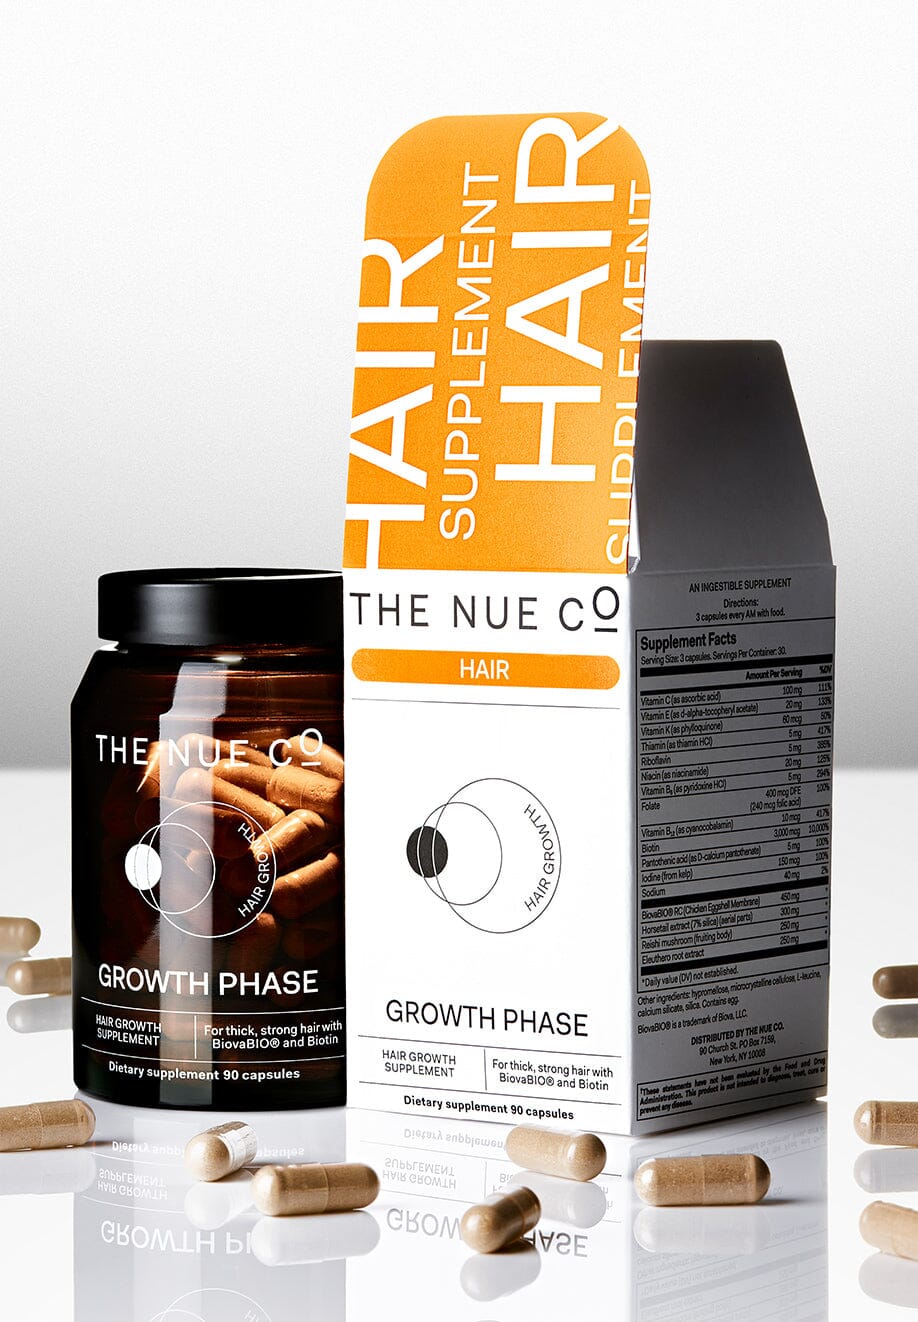 GROWTH PHASE Single The Nue Co. 